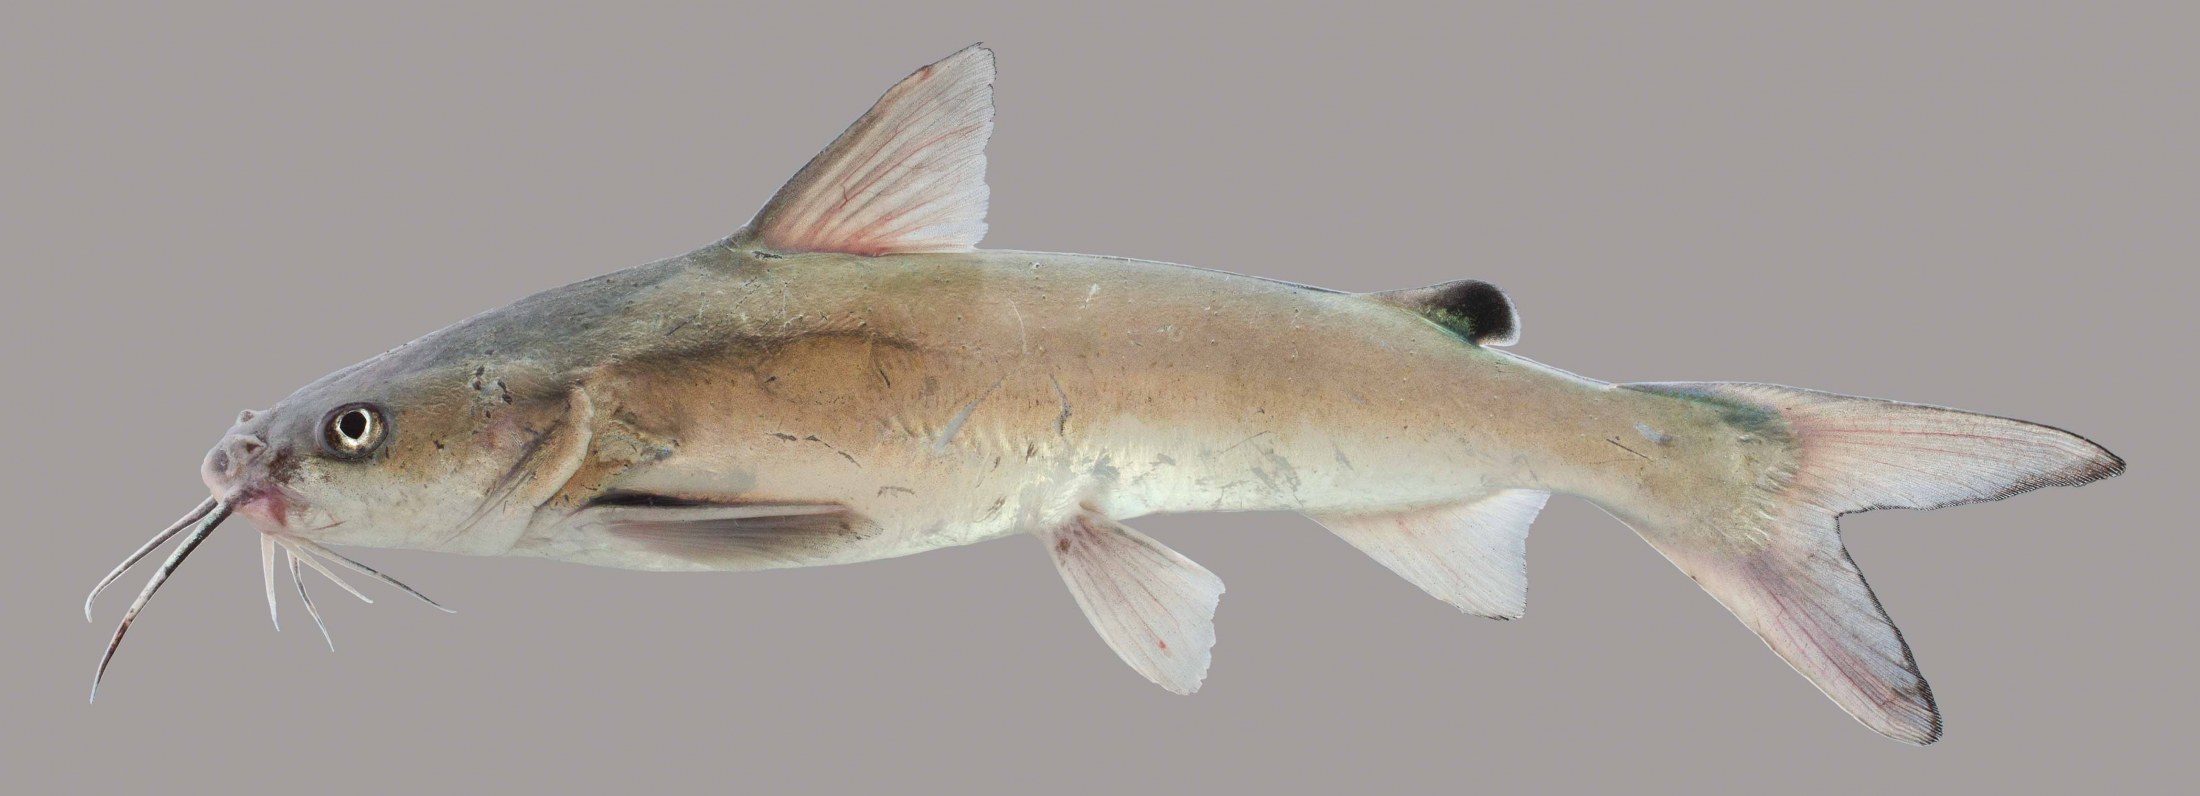 Lateral view of a hardhead catfish